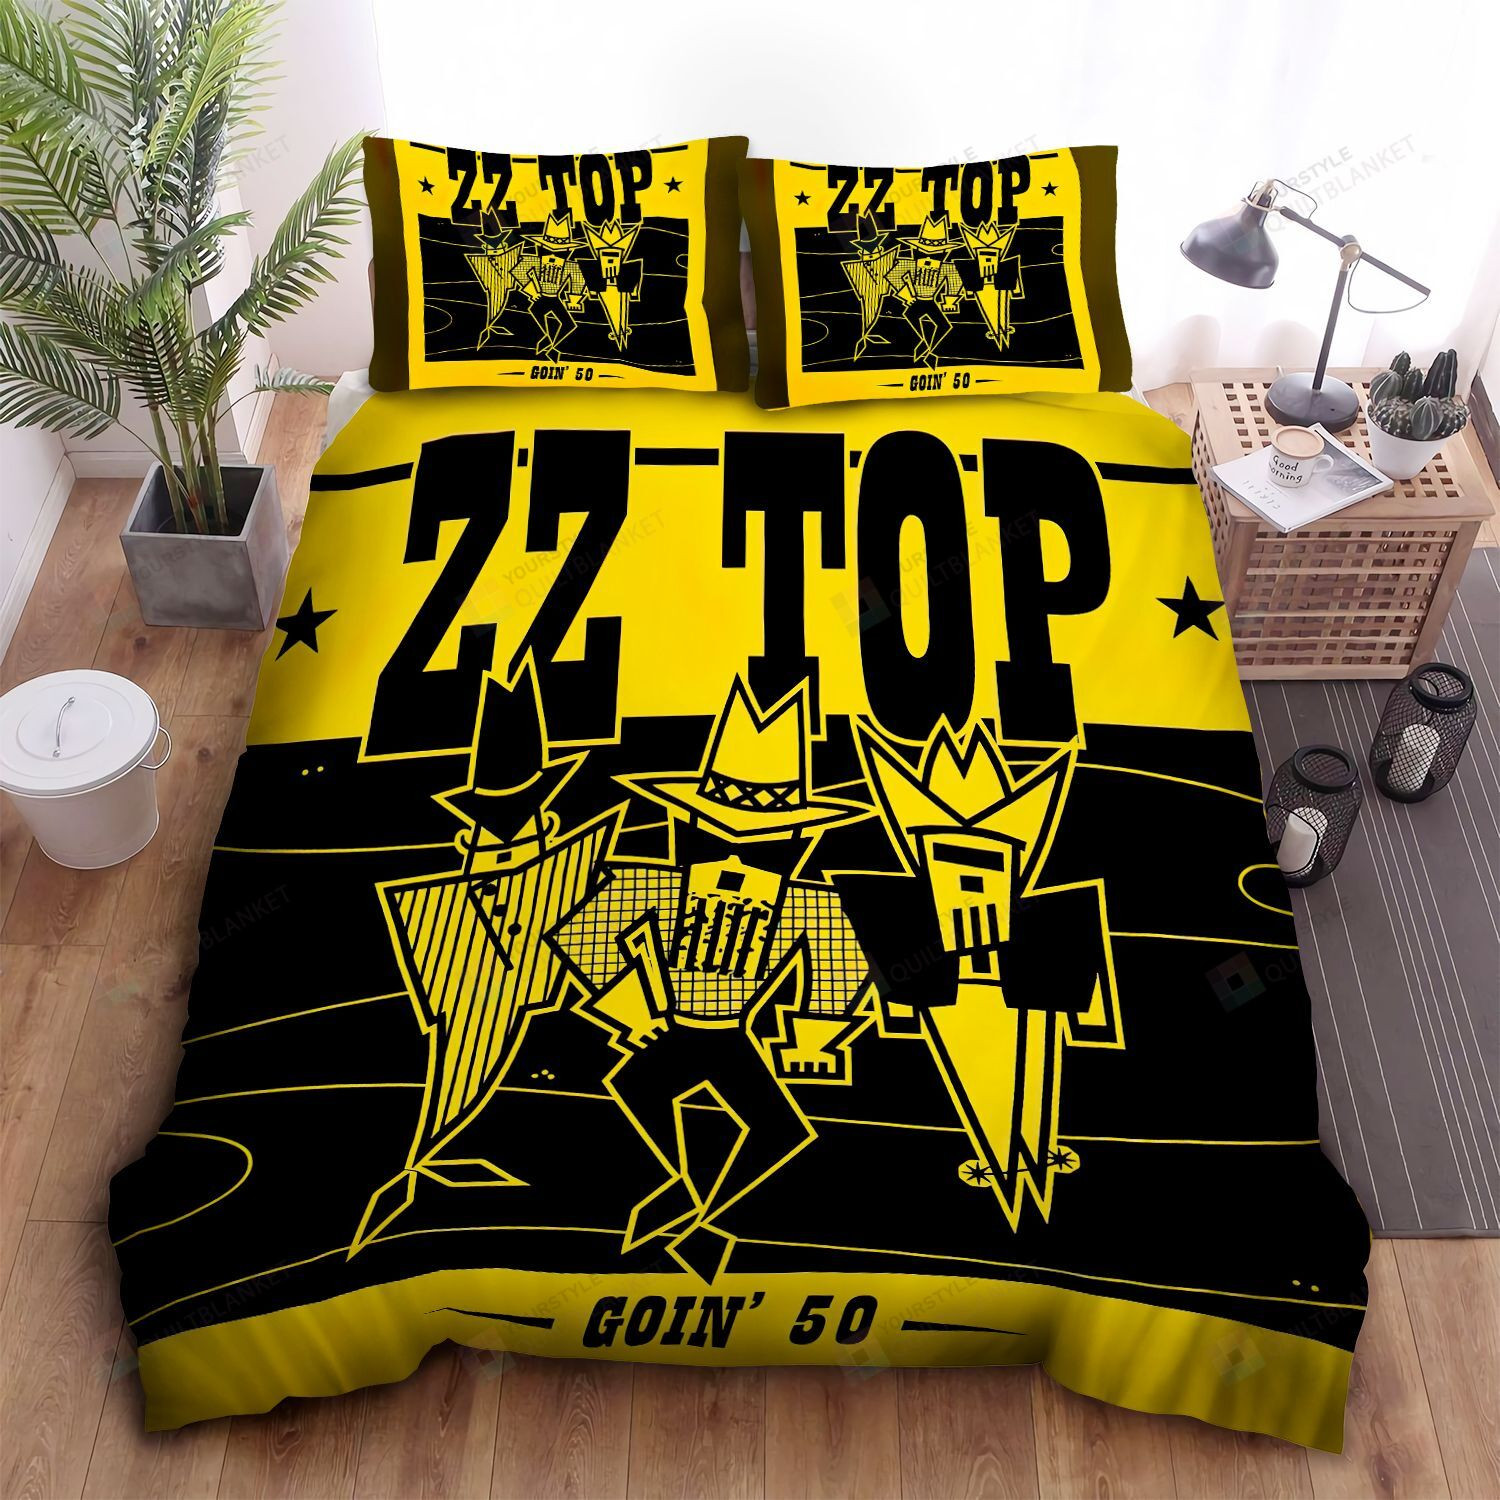 Zz Top, Going 50 Poster Bed Sheets Spread Duvet Cover Bedding Sets